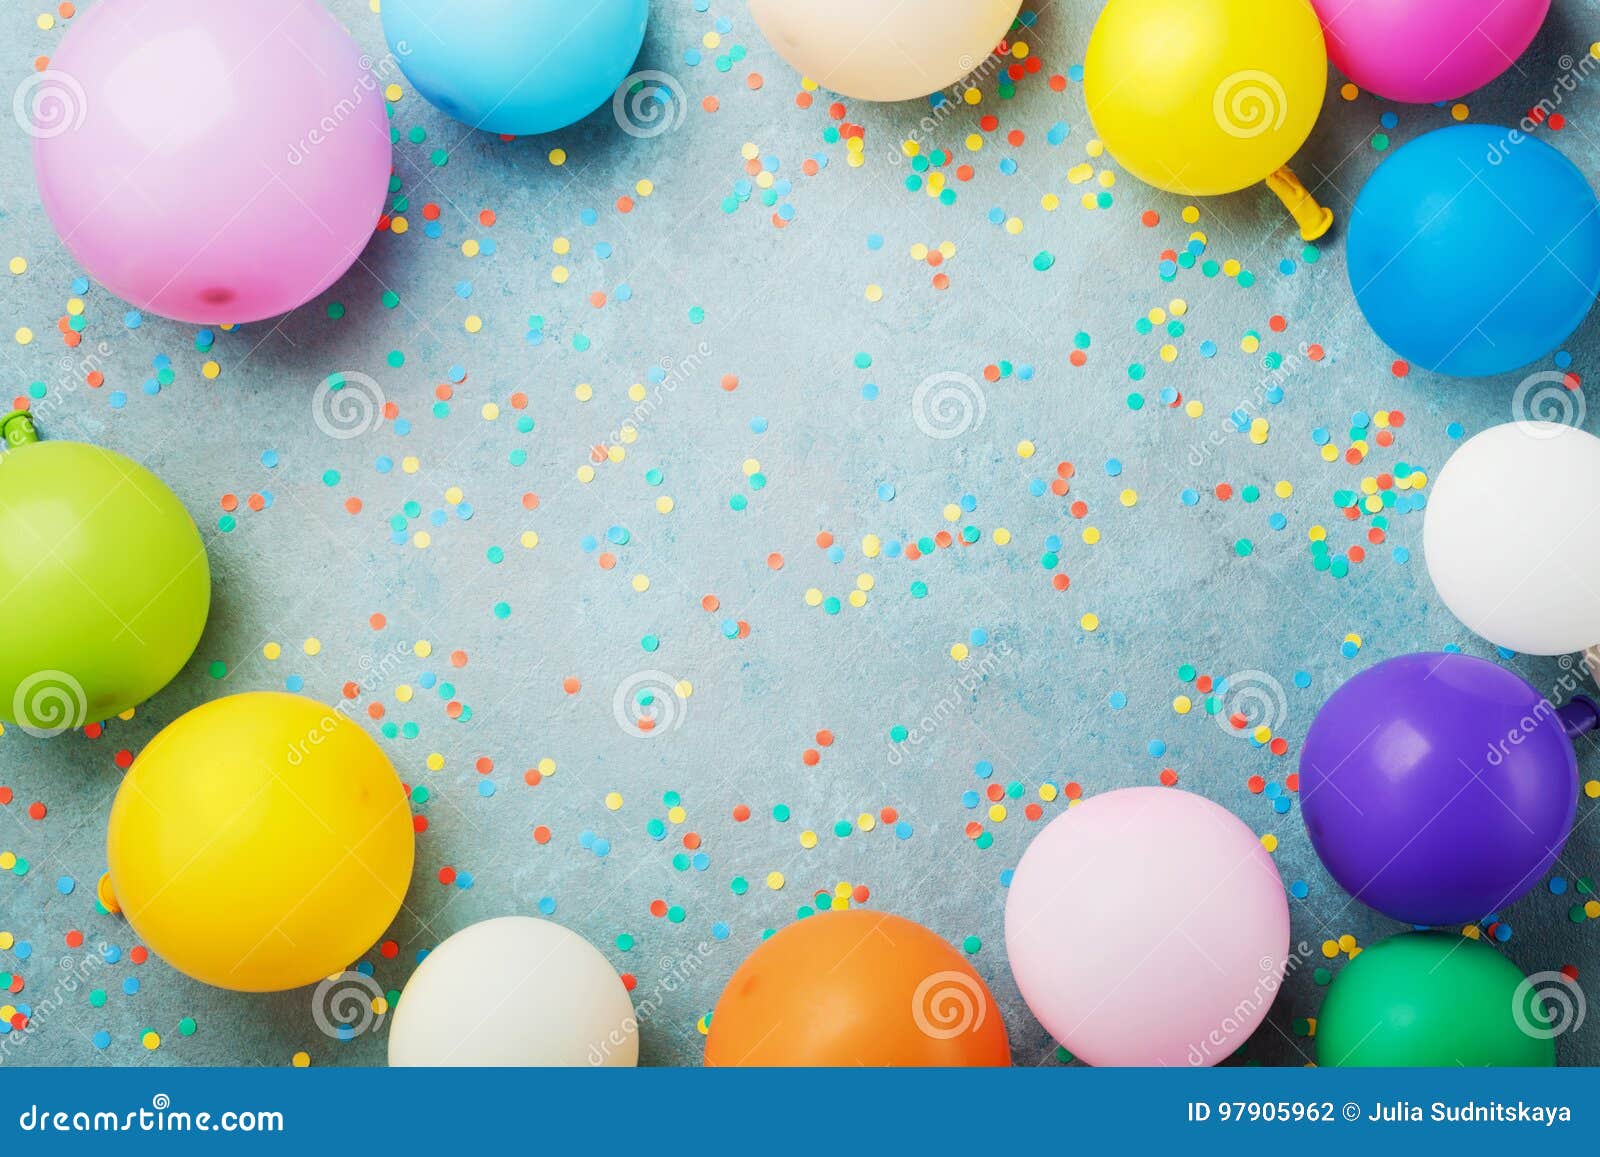 colorful balloons and confetti on turquoise table top view. birthday, holiday or party background. flat lay style.